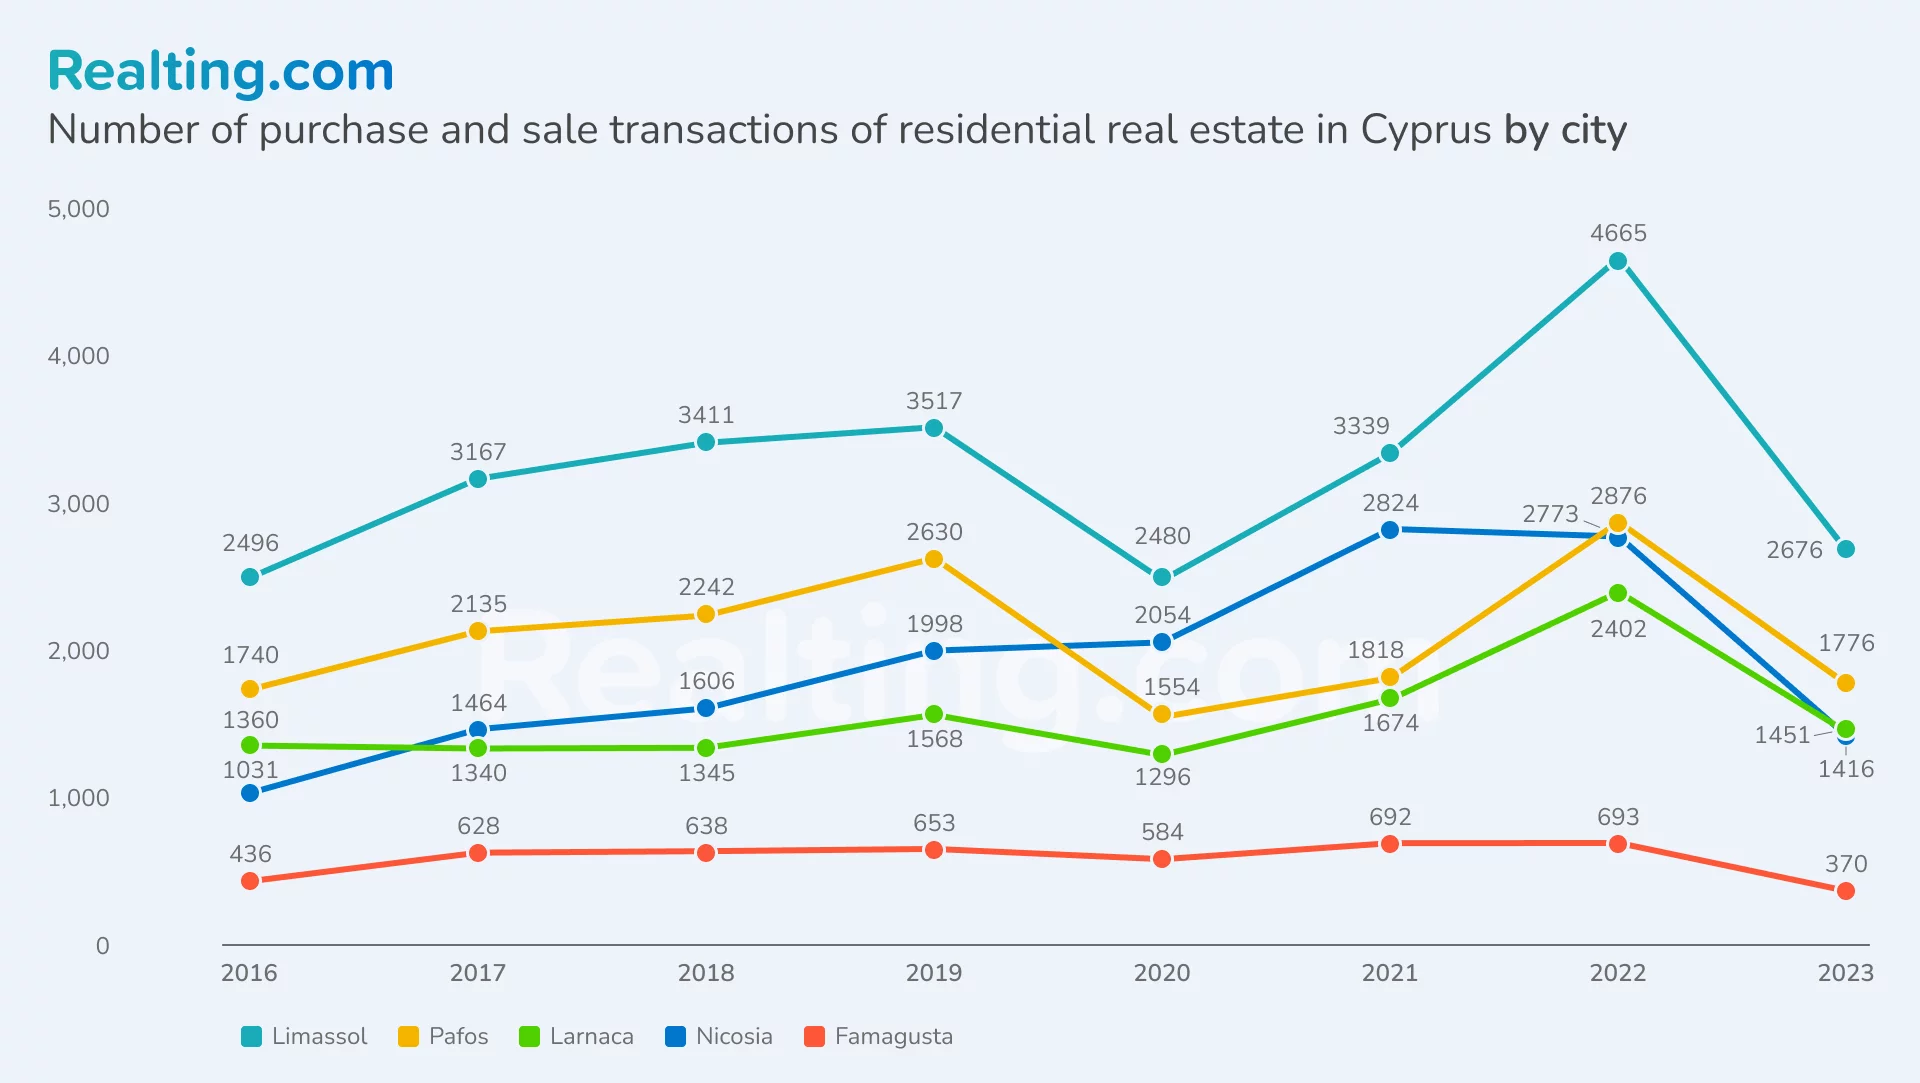 Number of purchase and sale transactions of residential real estate in Cyprus by city